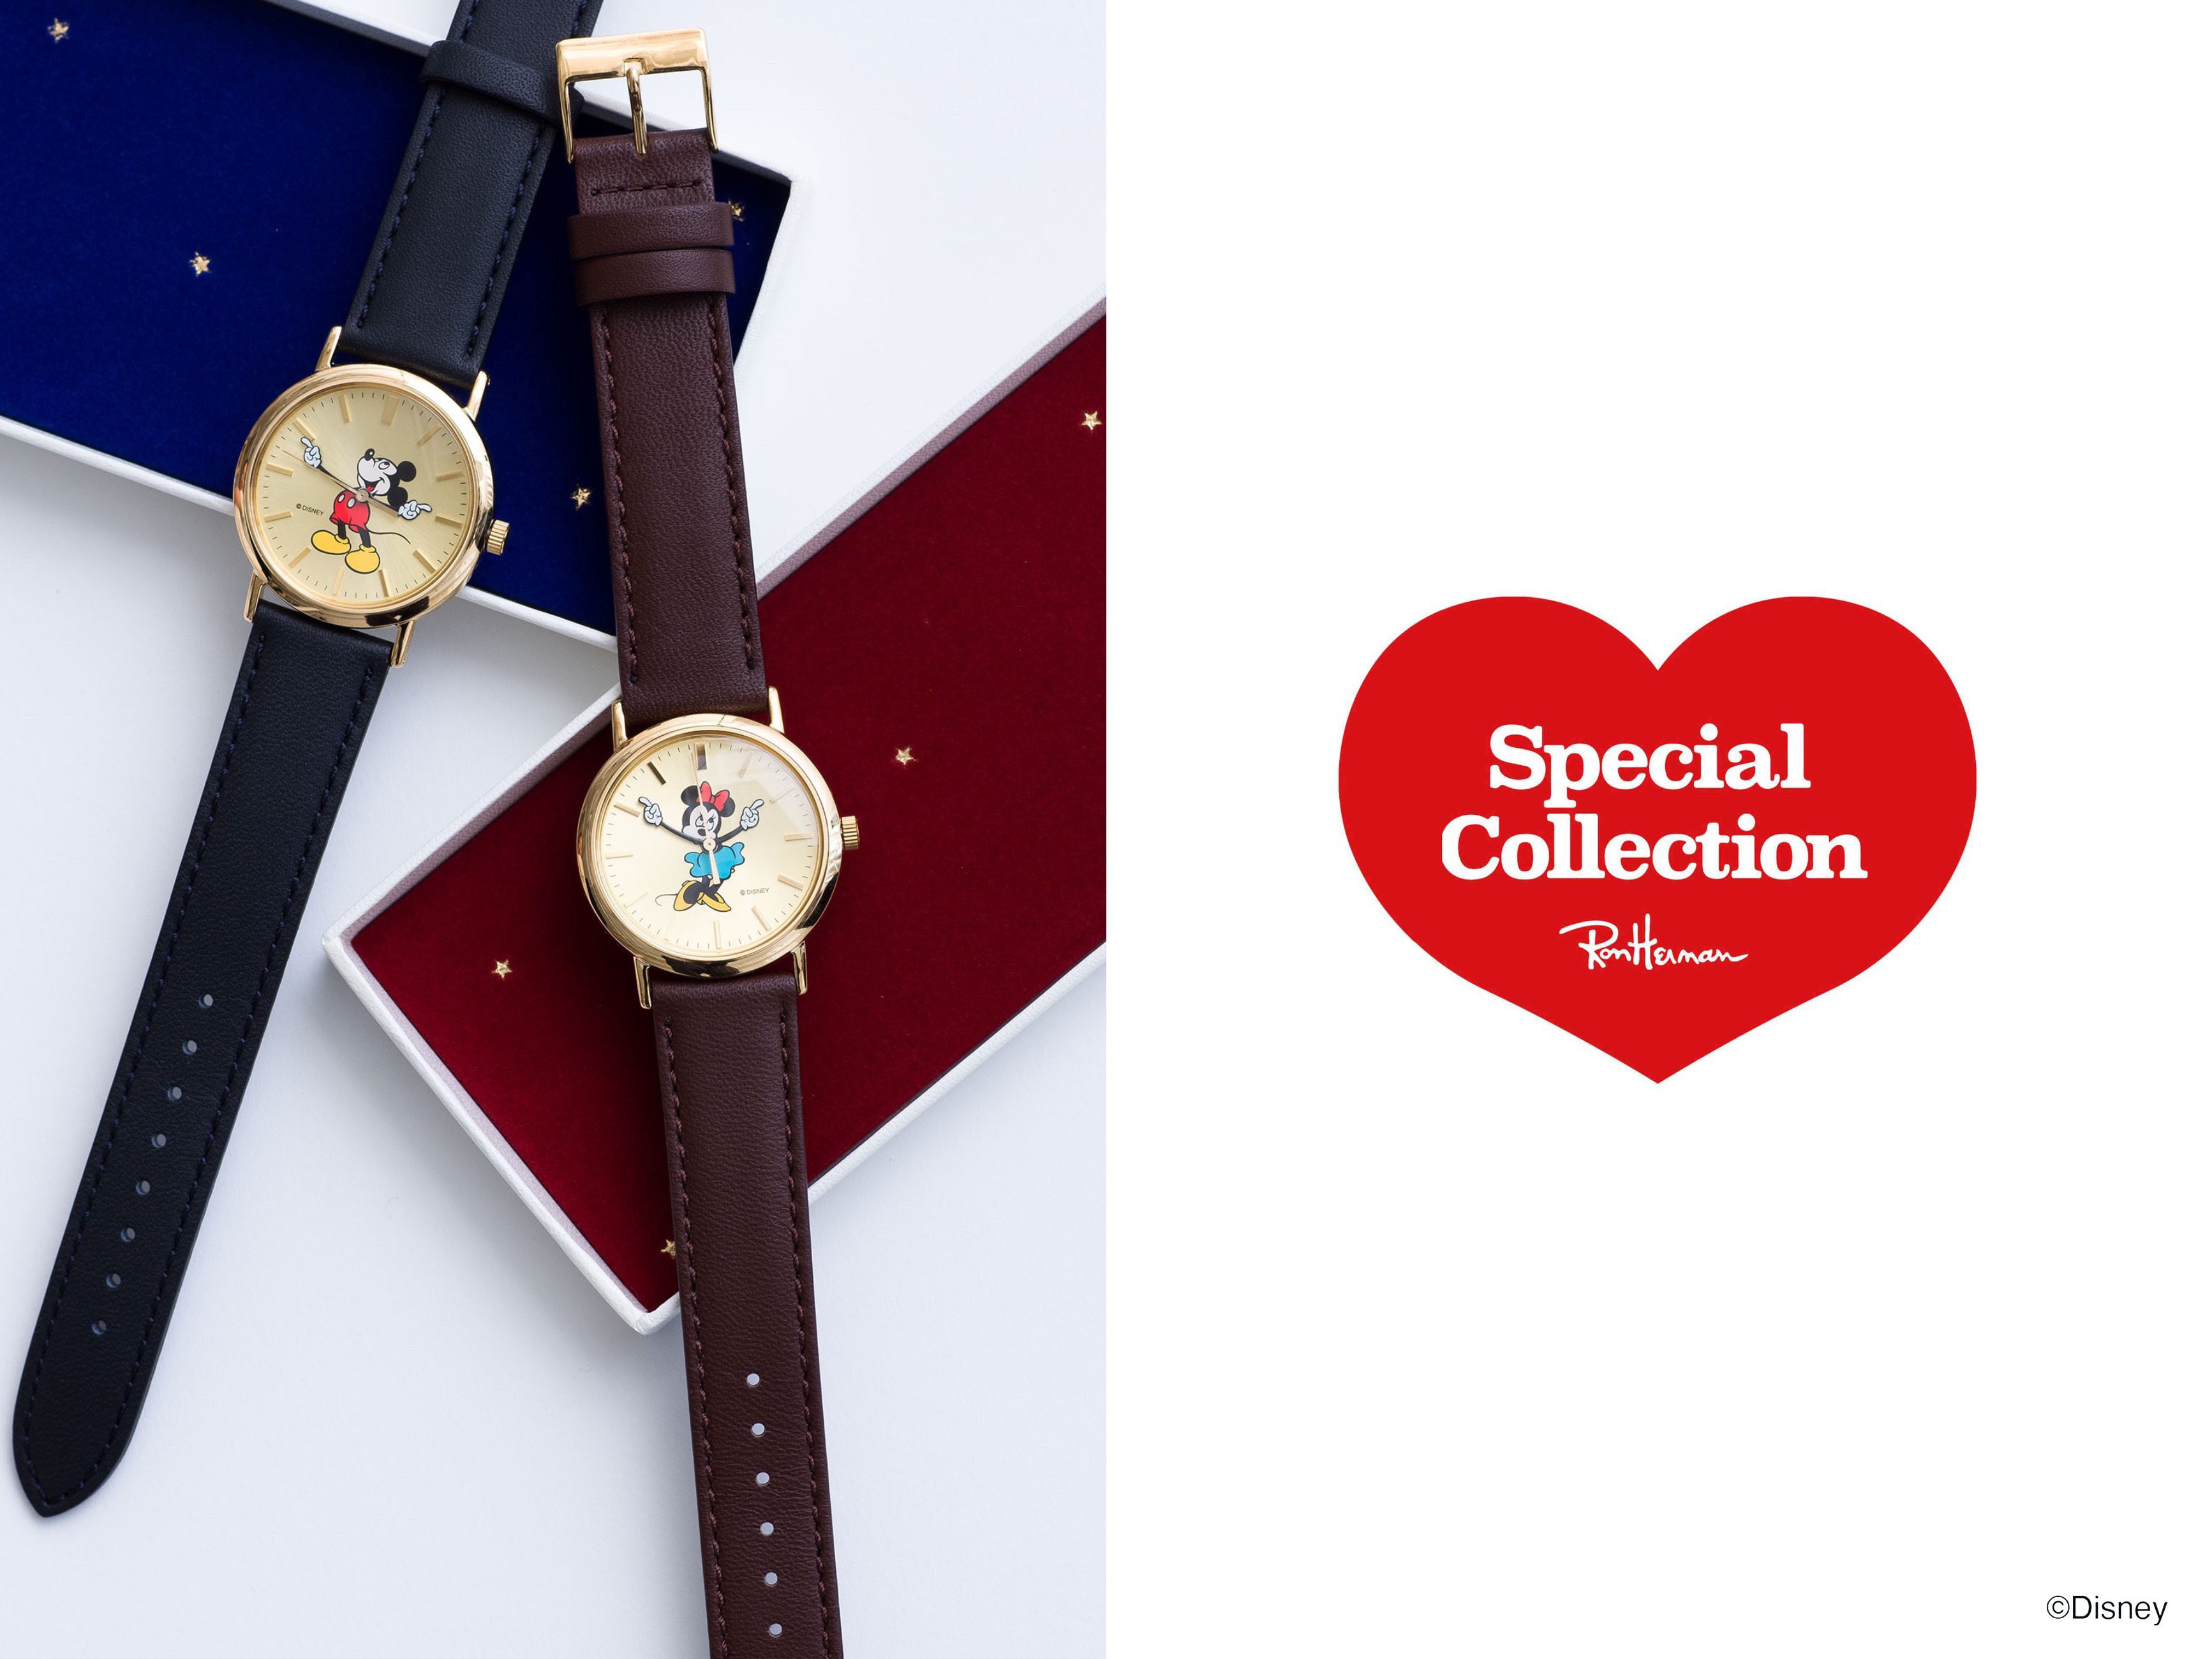 Disney Special Collection "Minnie / Watch" New Release